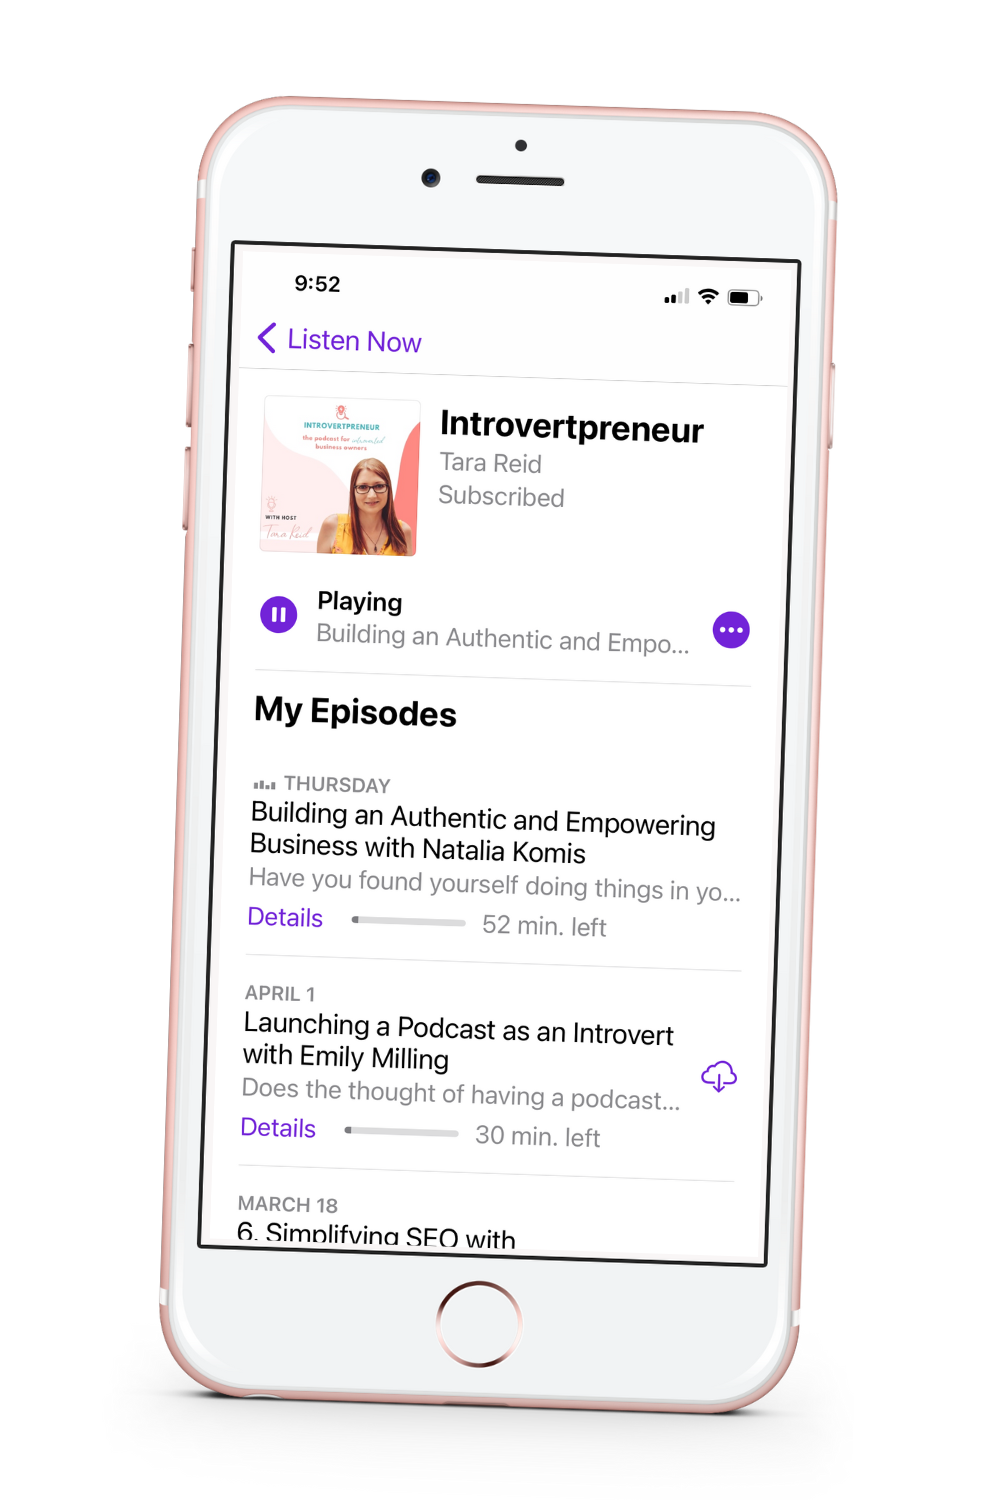 The Introvertpreneur Podcast